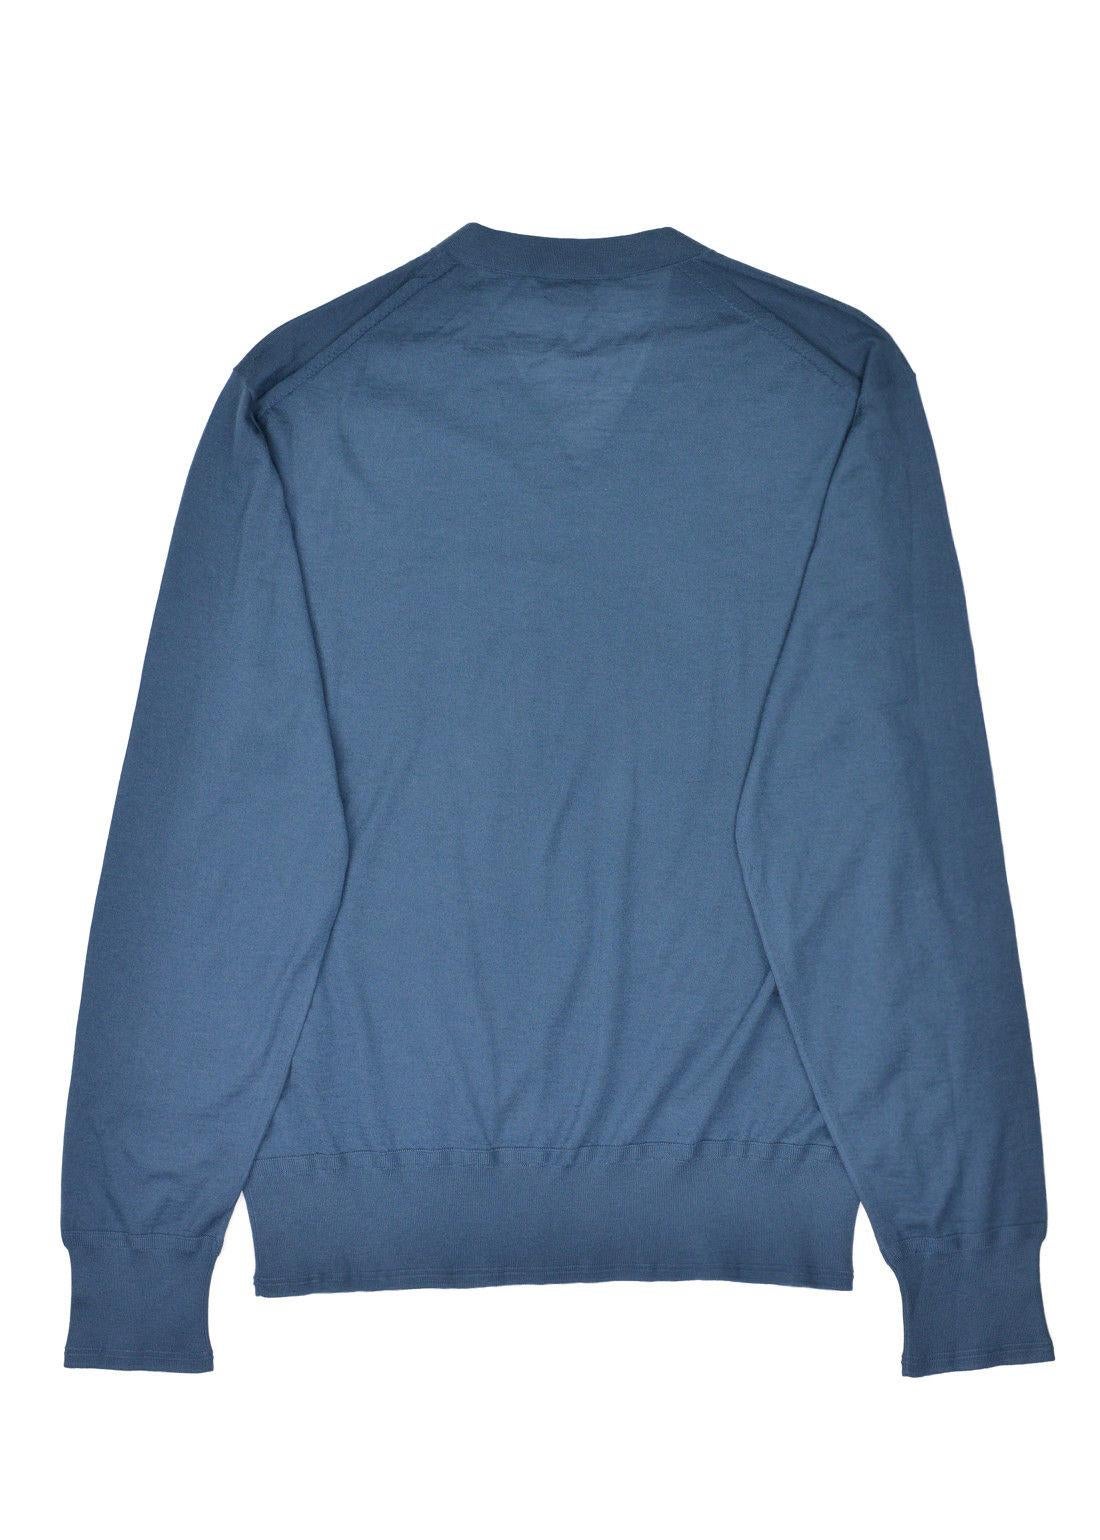 Tom Ford Mens Cashmere Blue V Neck Long Sleeve Sweater Size IT44/US34~RTL$1450 In New Condition For Sale In Brooklyn, NY